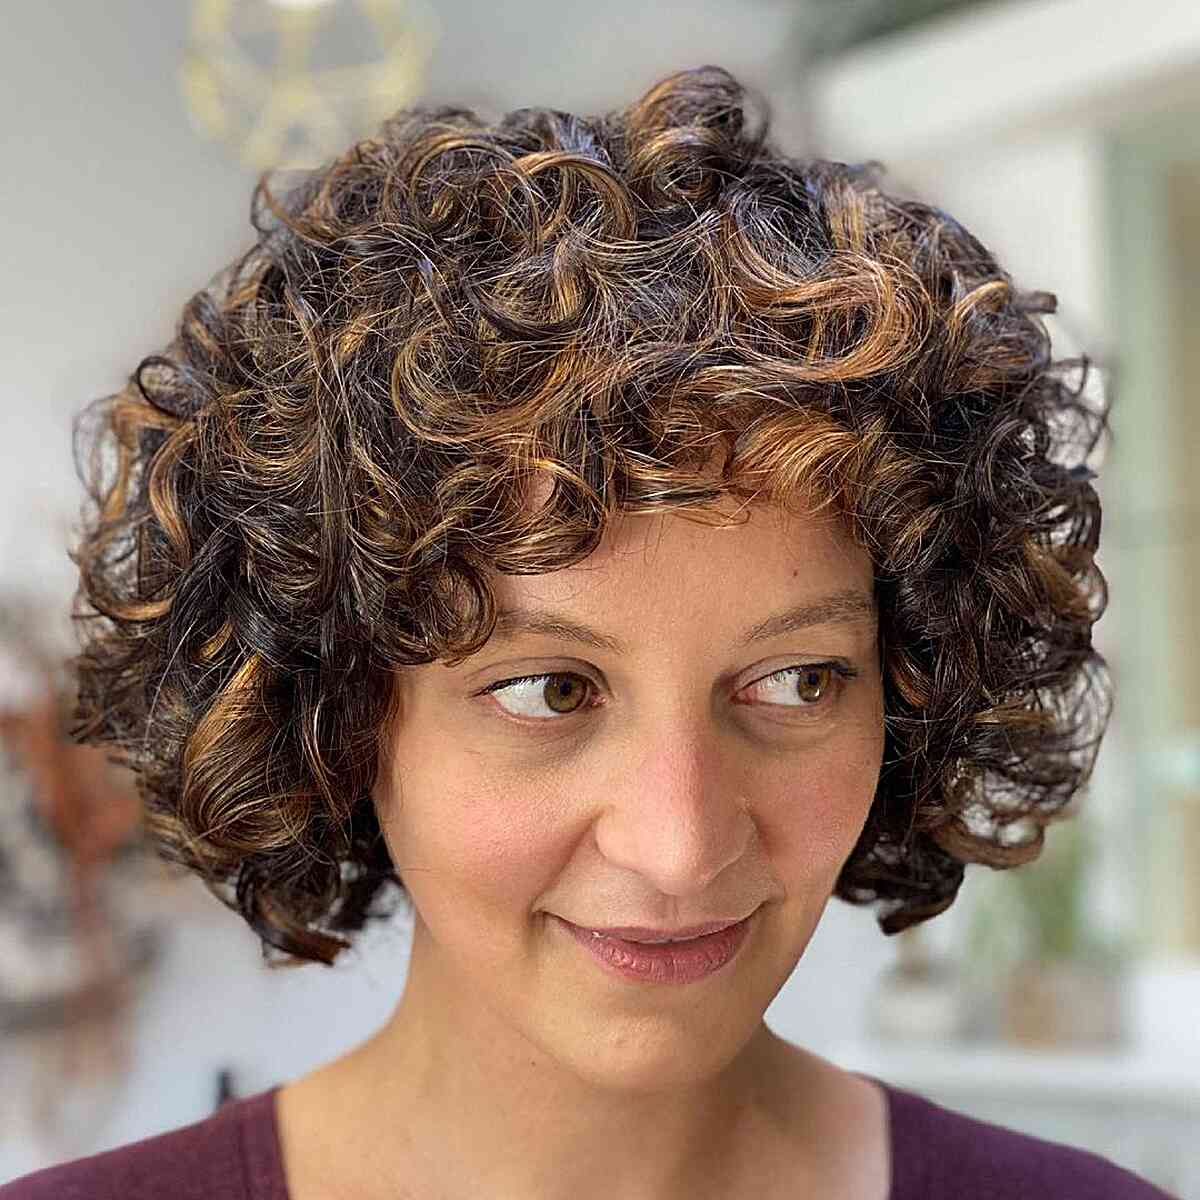 Short Curly Rezo Cut Bob Style for women with thick curls and a longer face